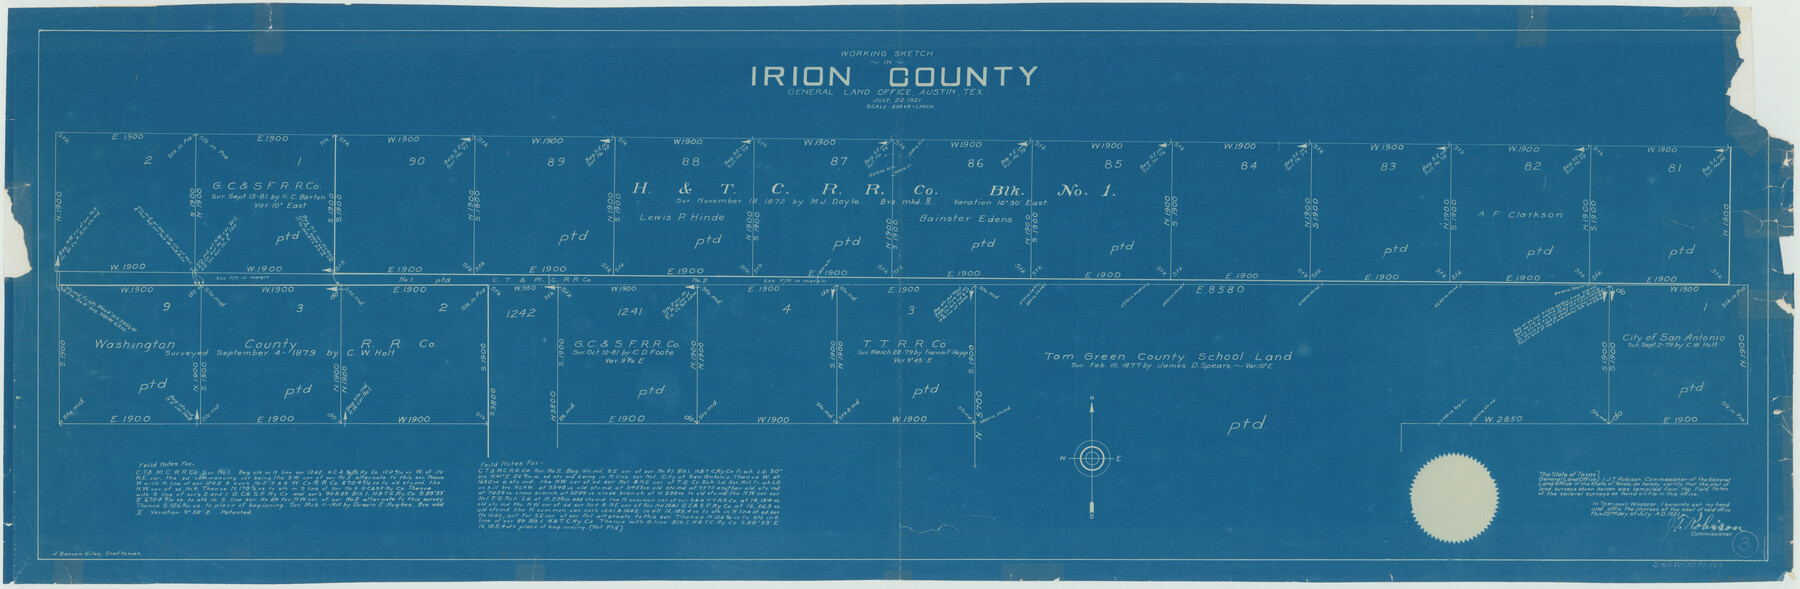 66412, Irion County Working Sketch 3, General Map Collection